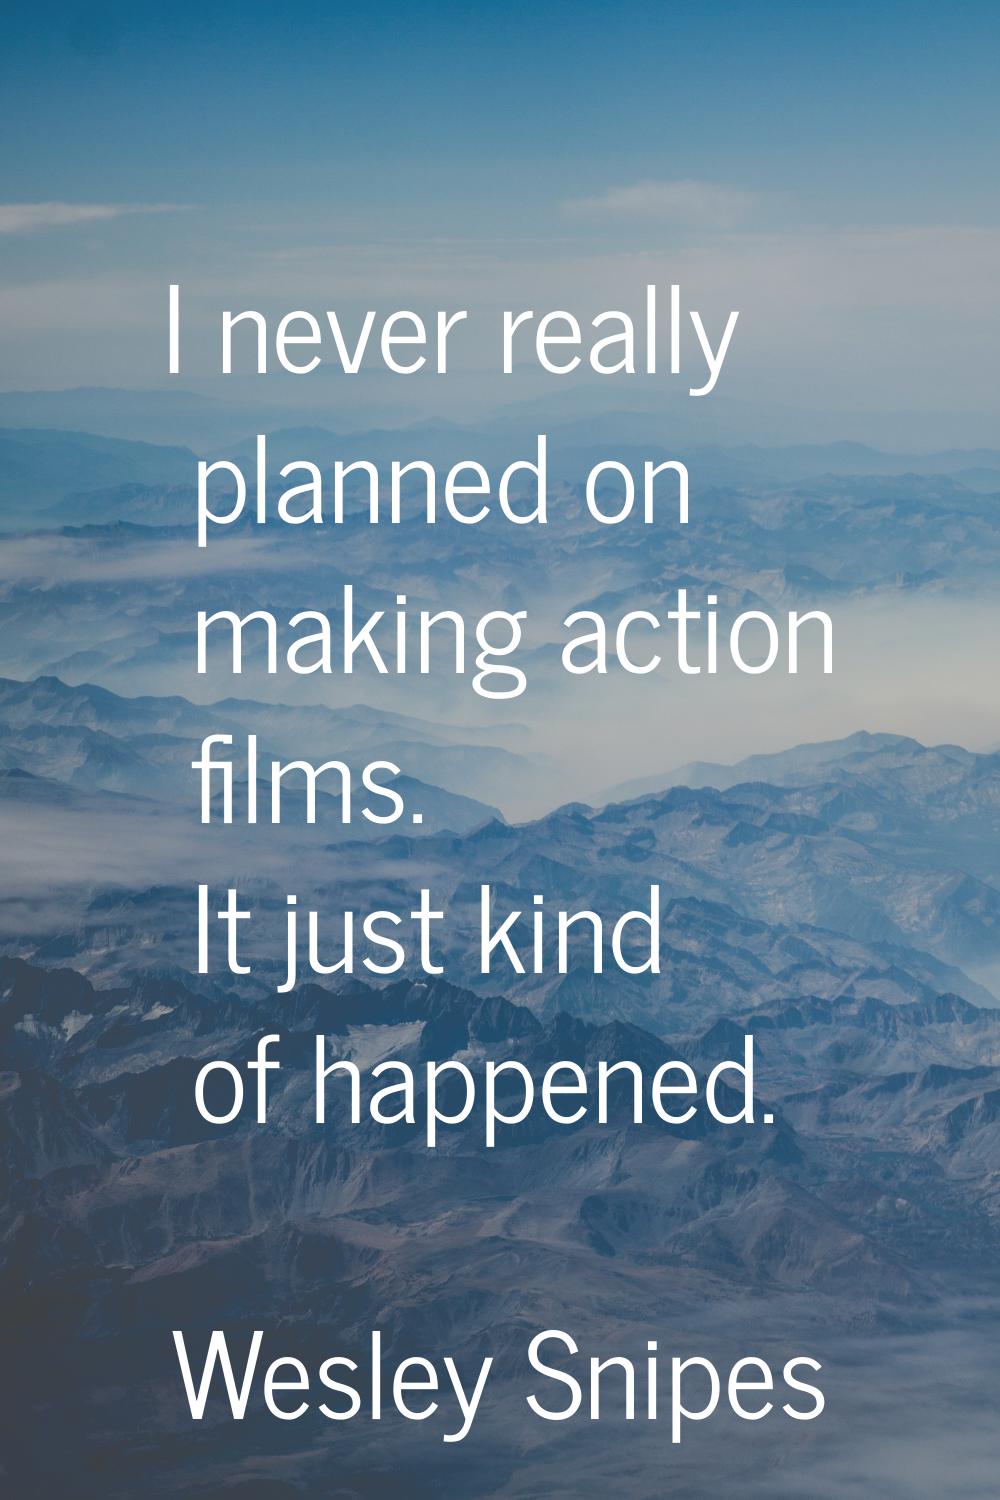 I never really planned on making action films. It just kind of happened.